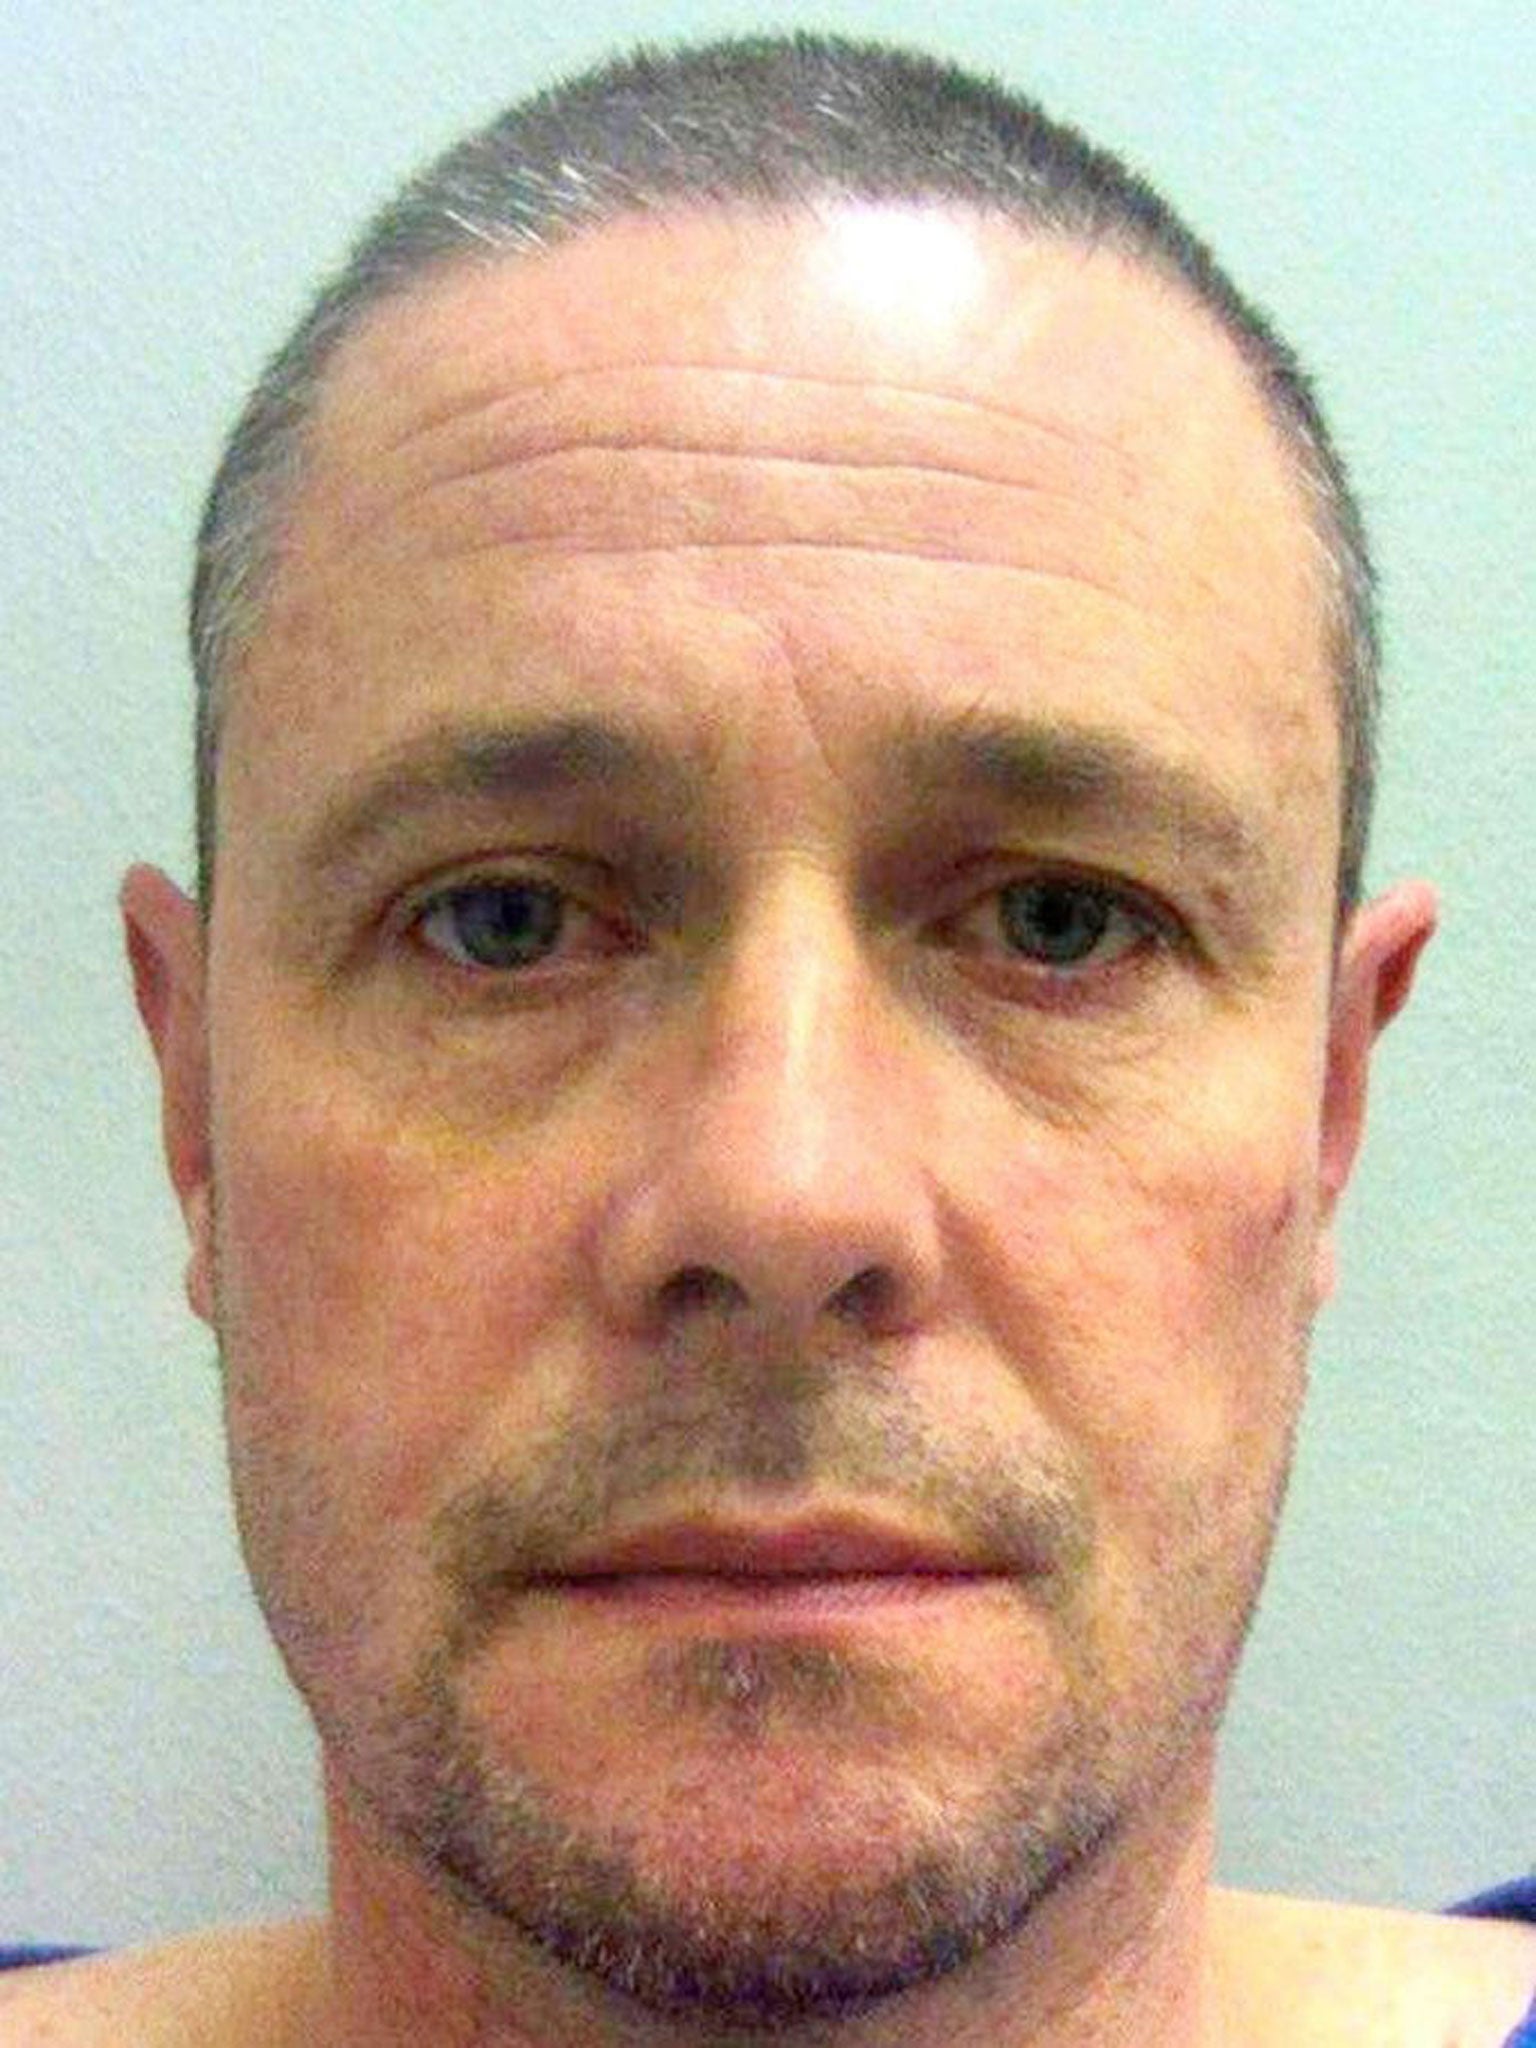 Mark Bridger has been attacked in prison by a fellow inmate